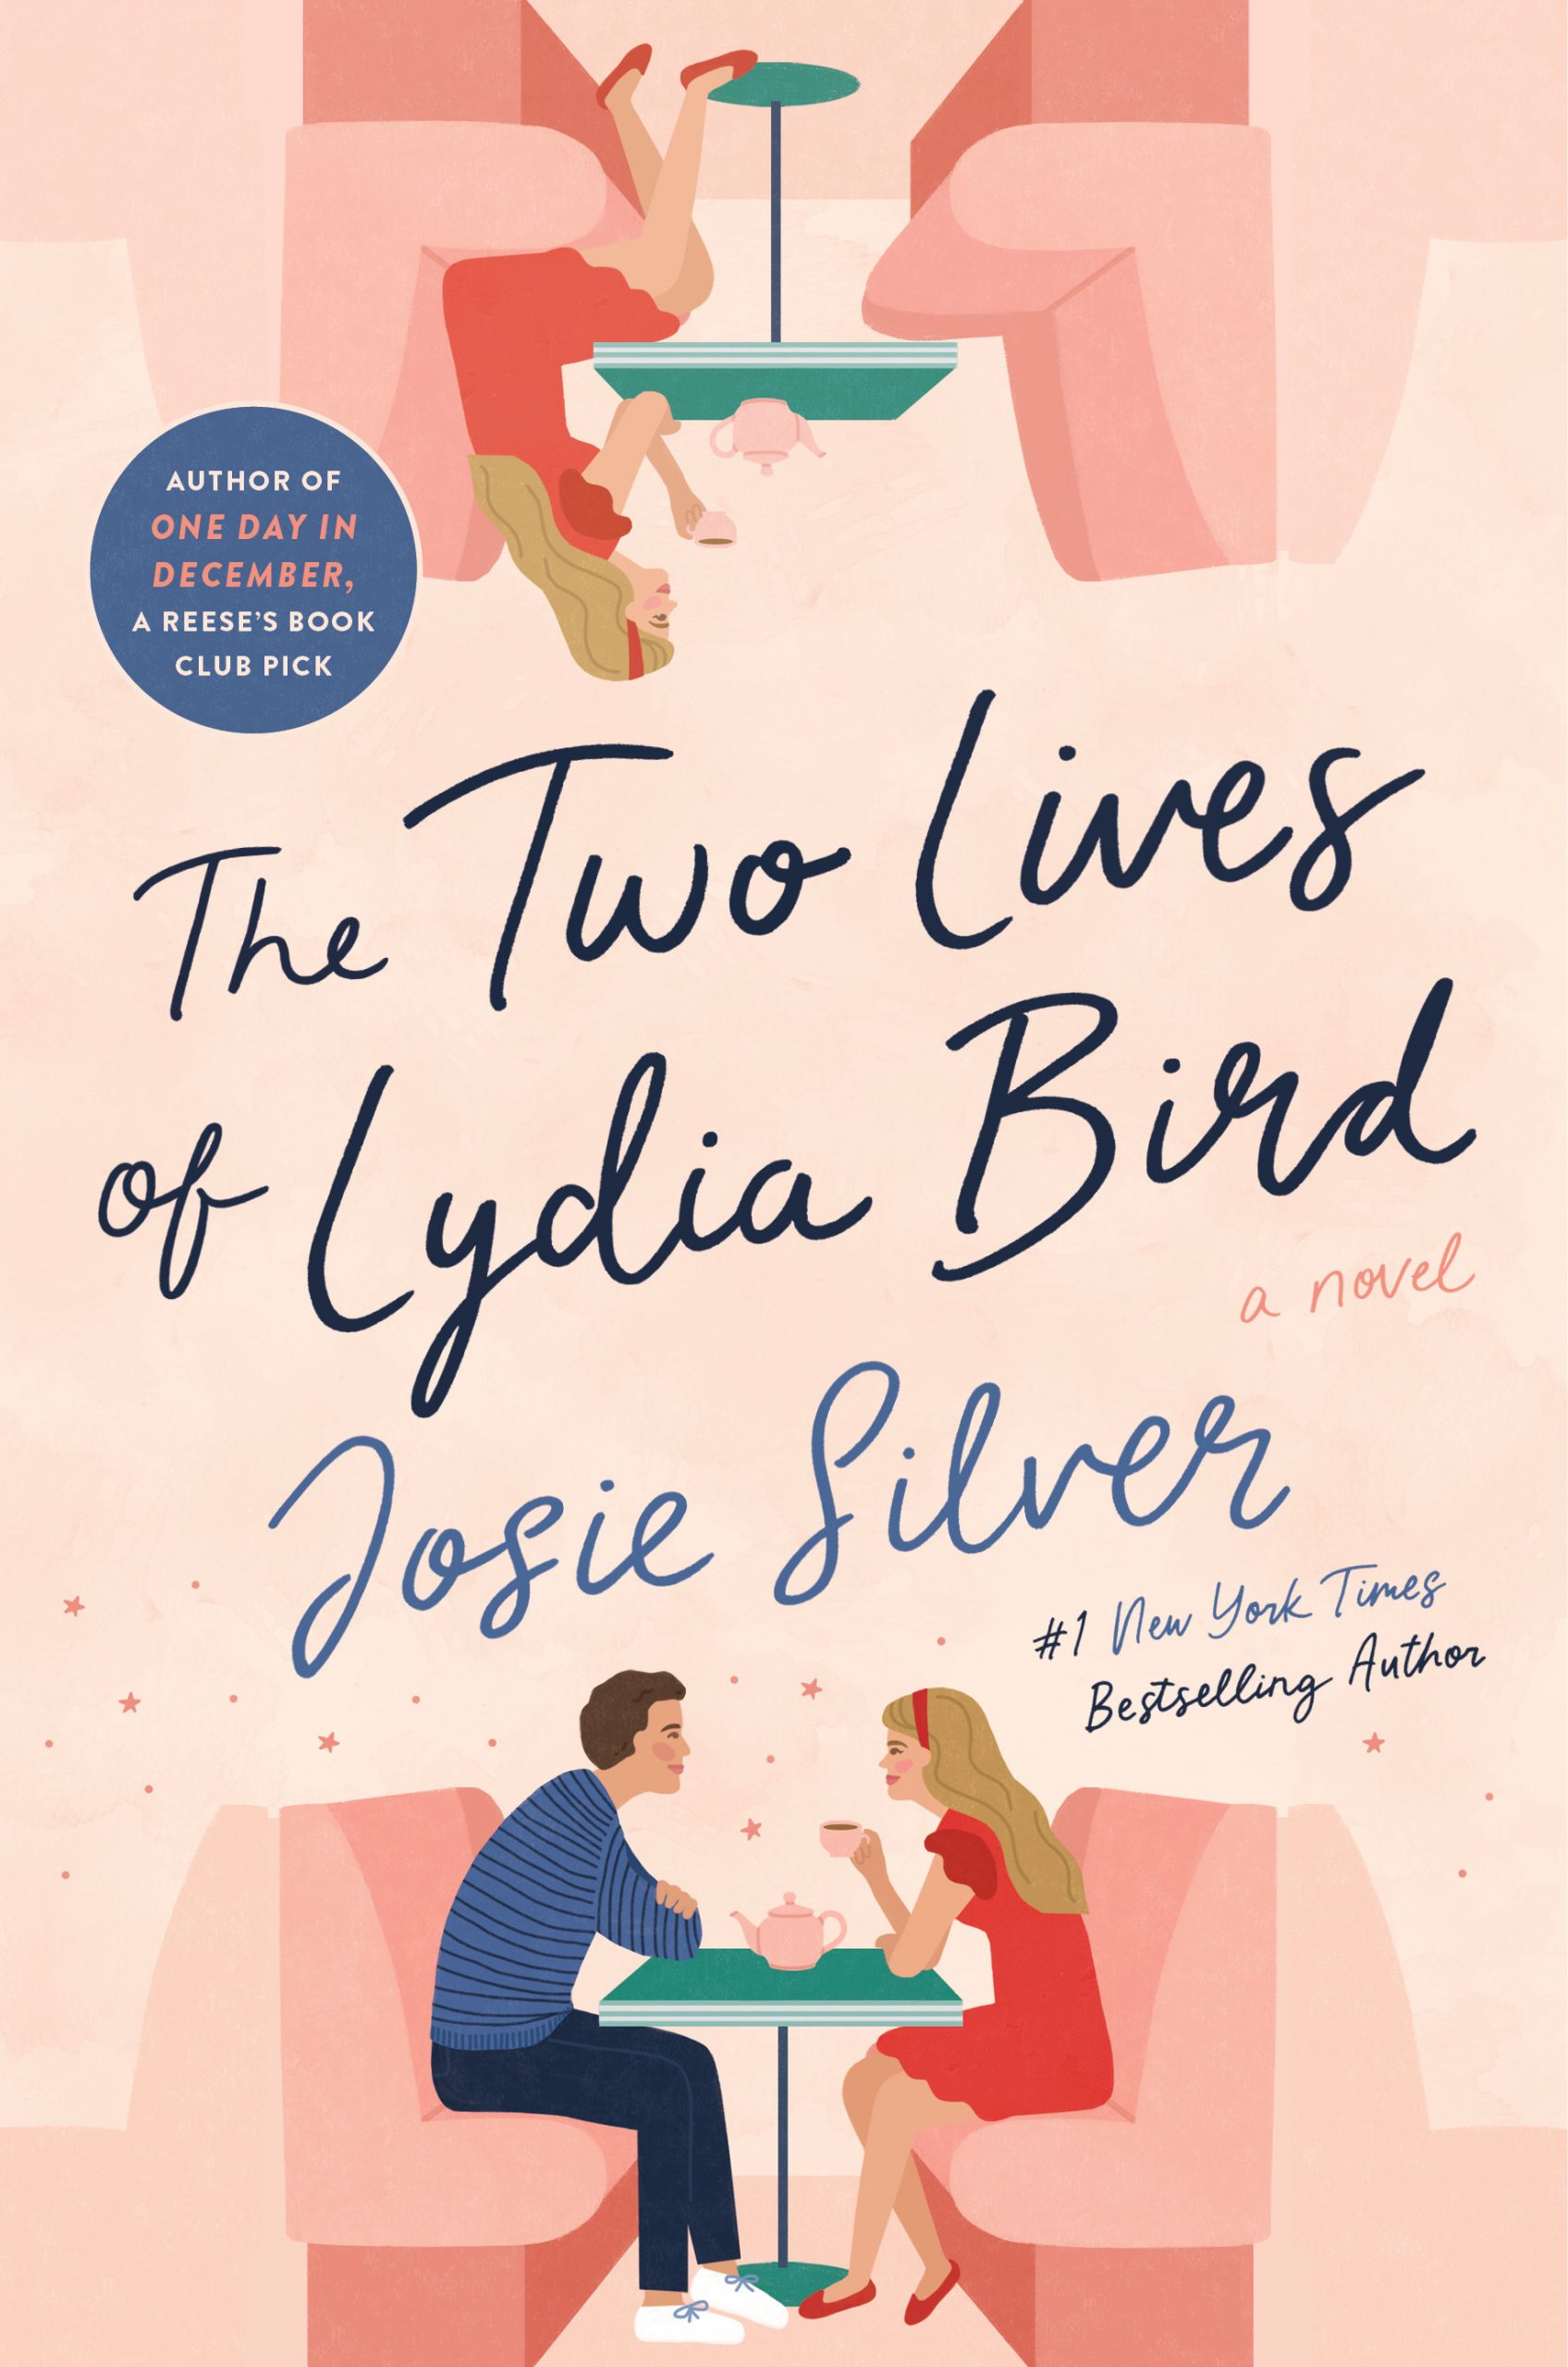 The Two Lives of Lydia Bird by Josie Silver book review